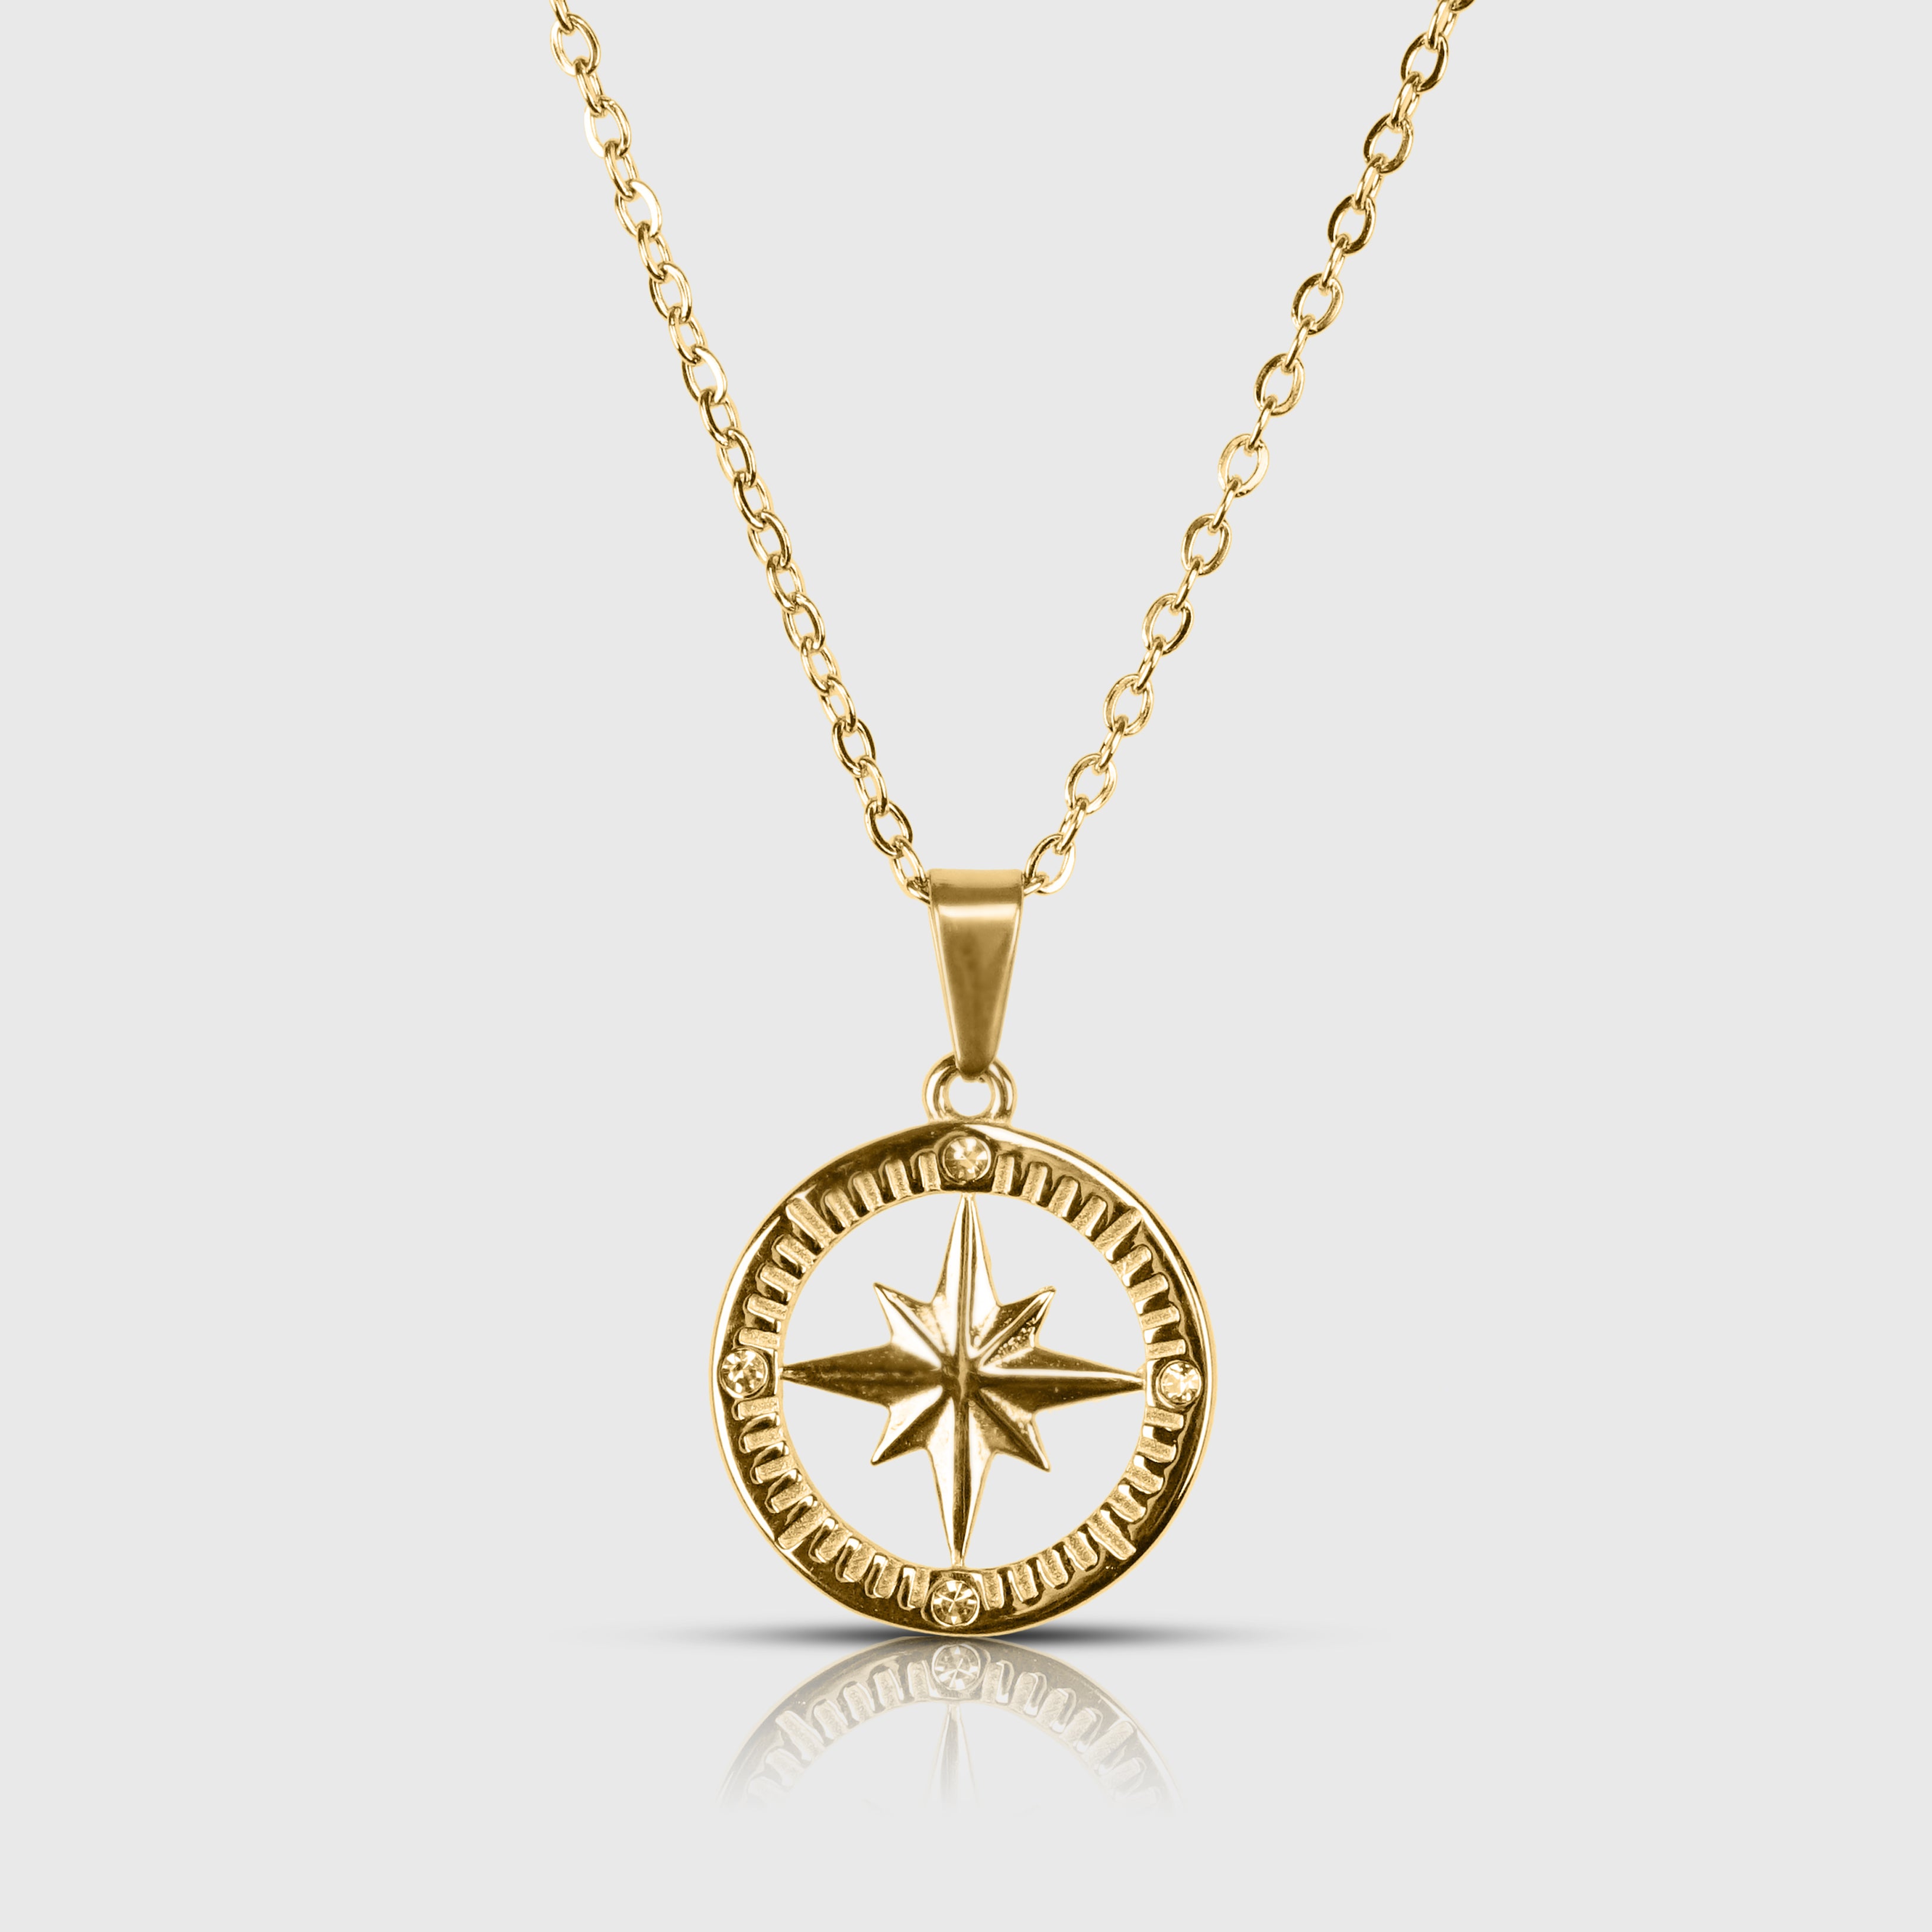 NORTH STAR NECKLACE - GOLD TONE